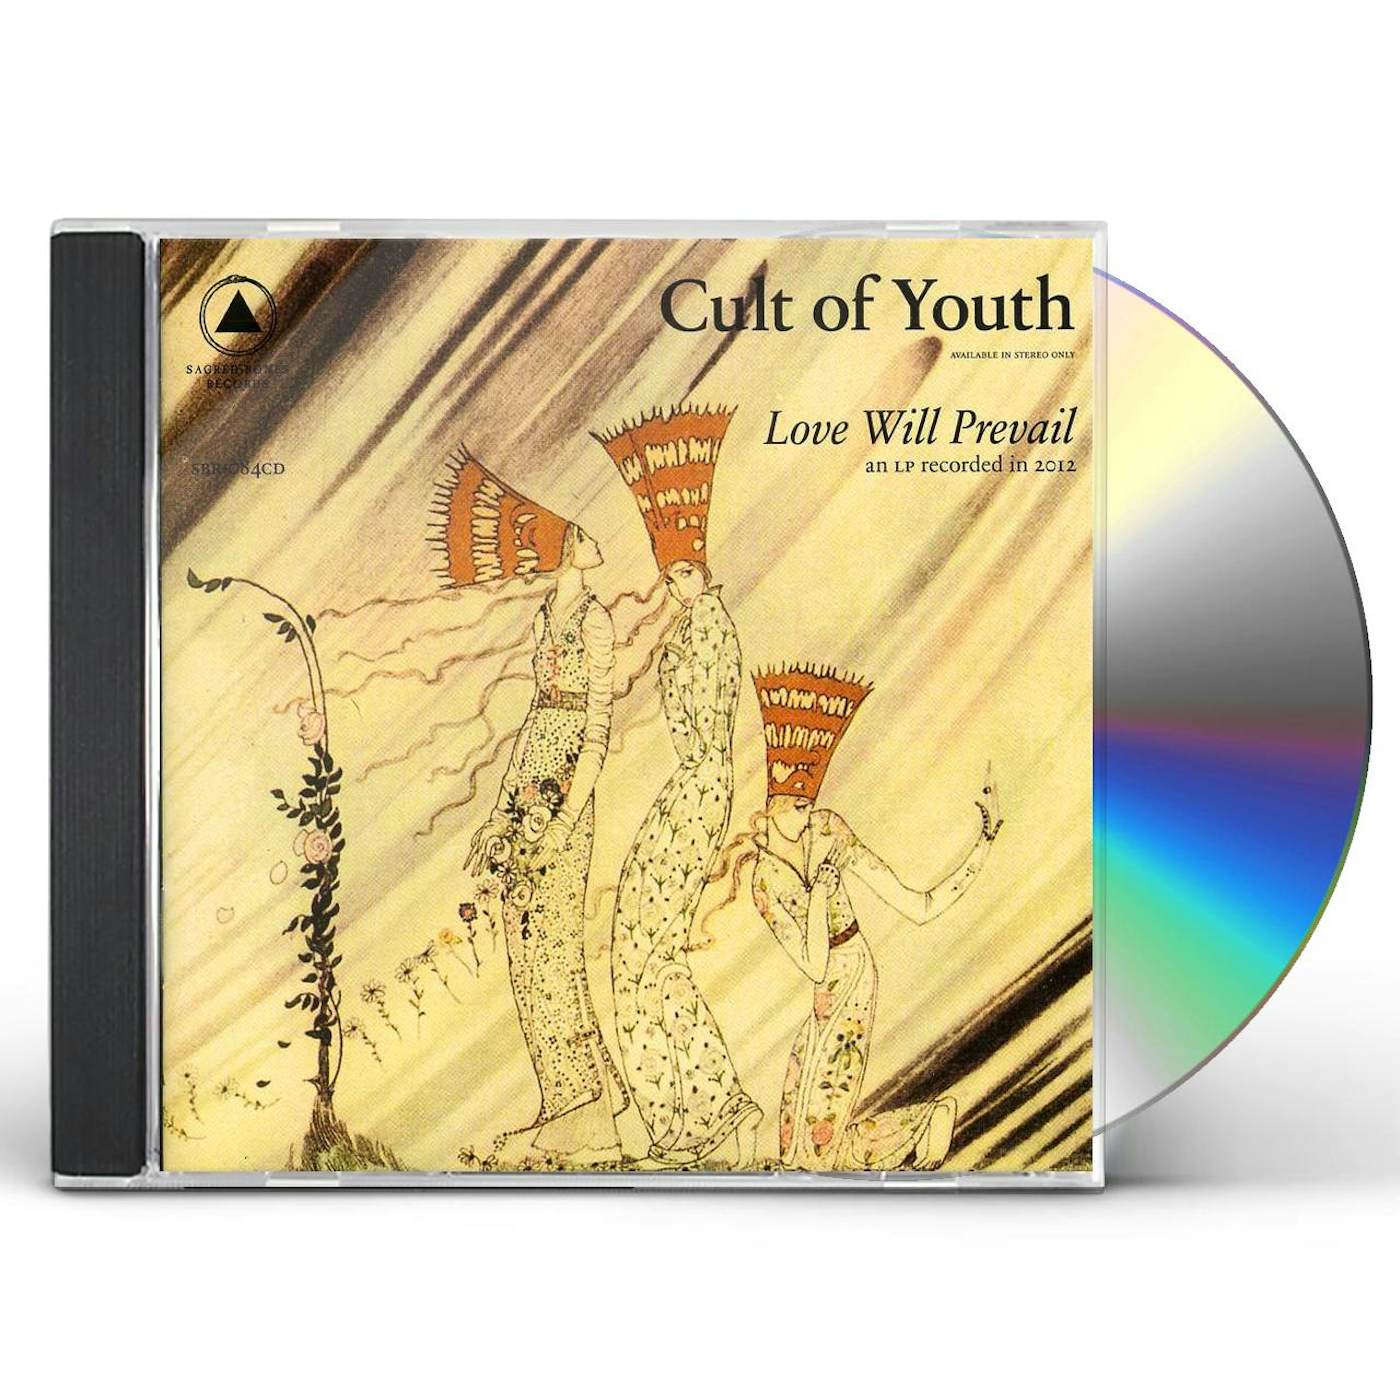 Cult of Youth LOVE WILL PREVAIL CD